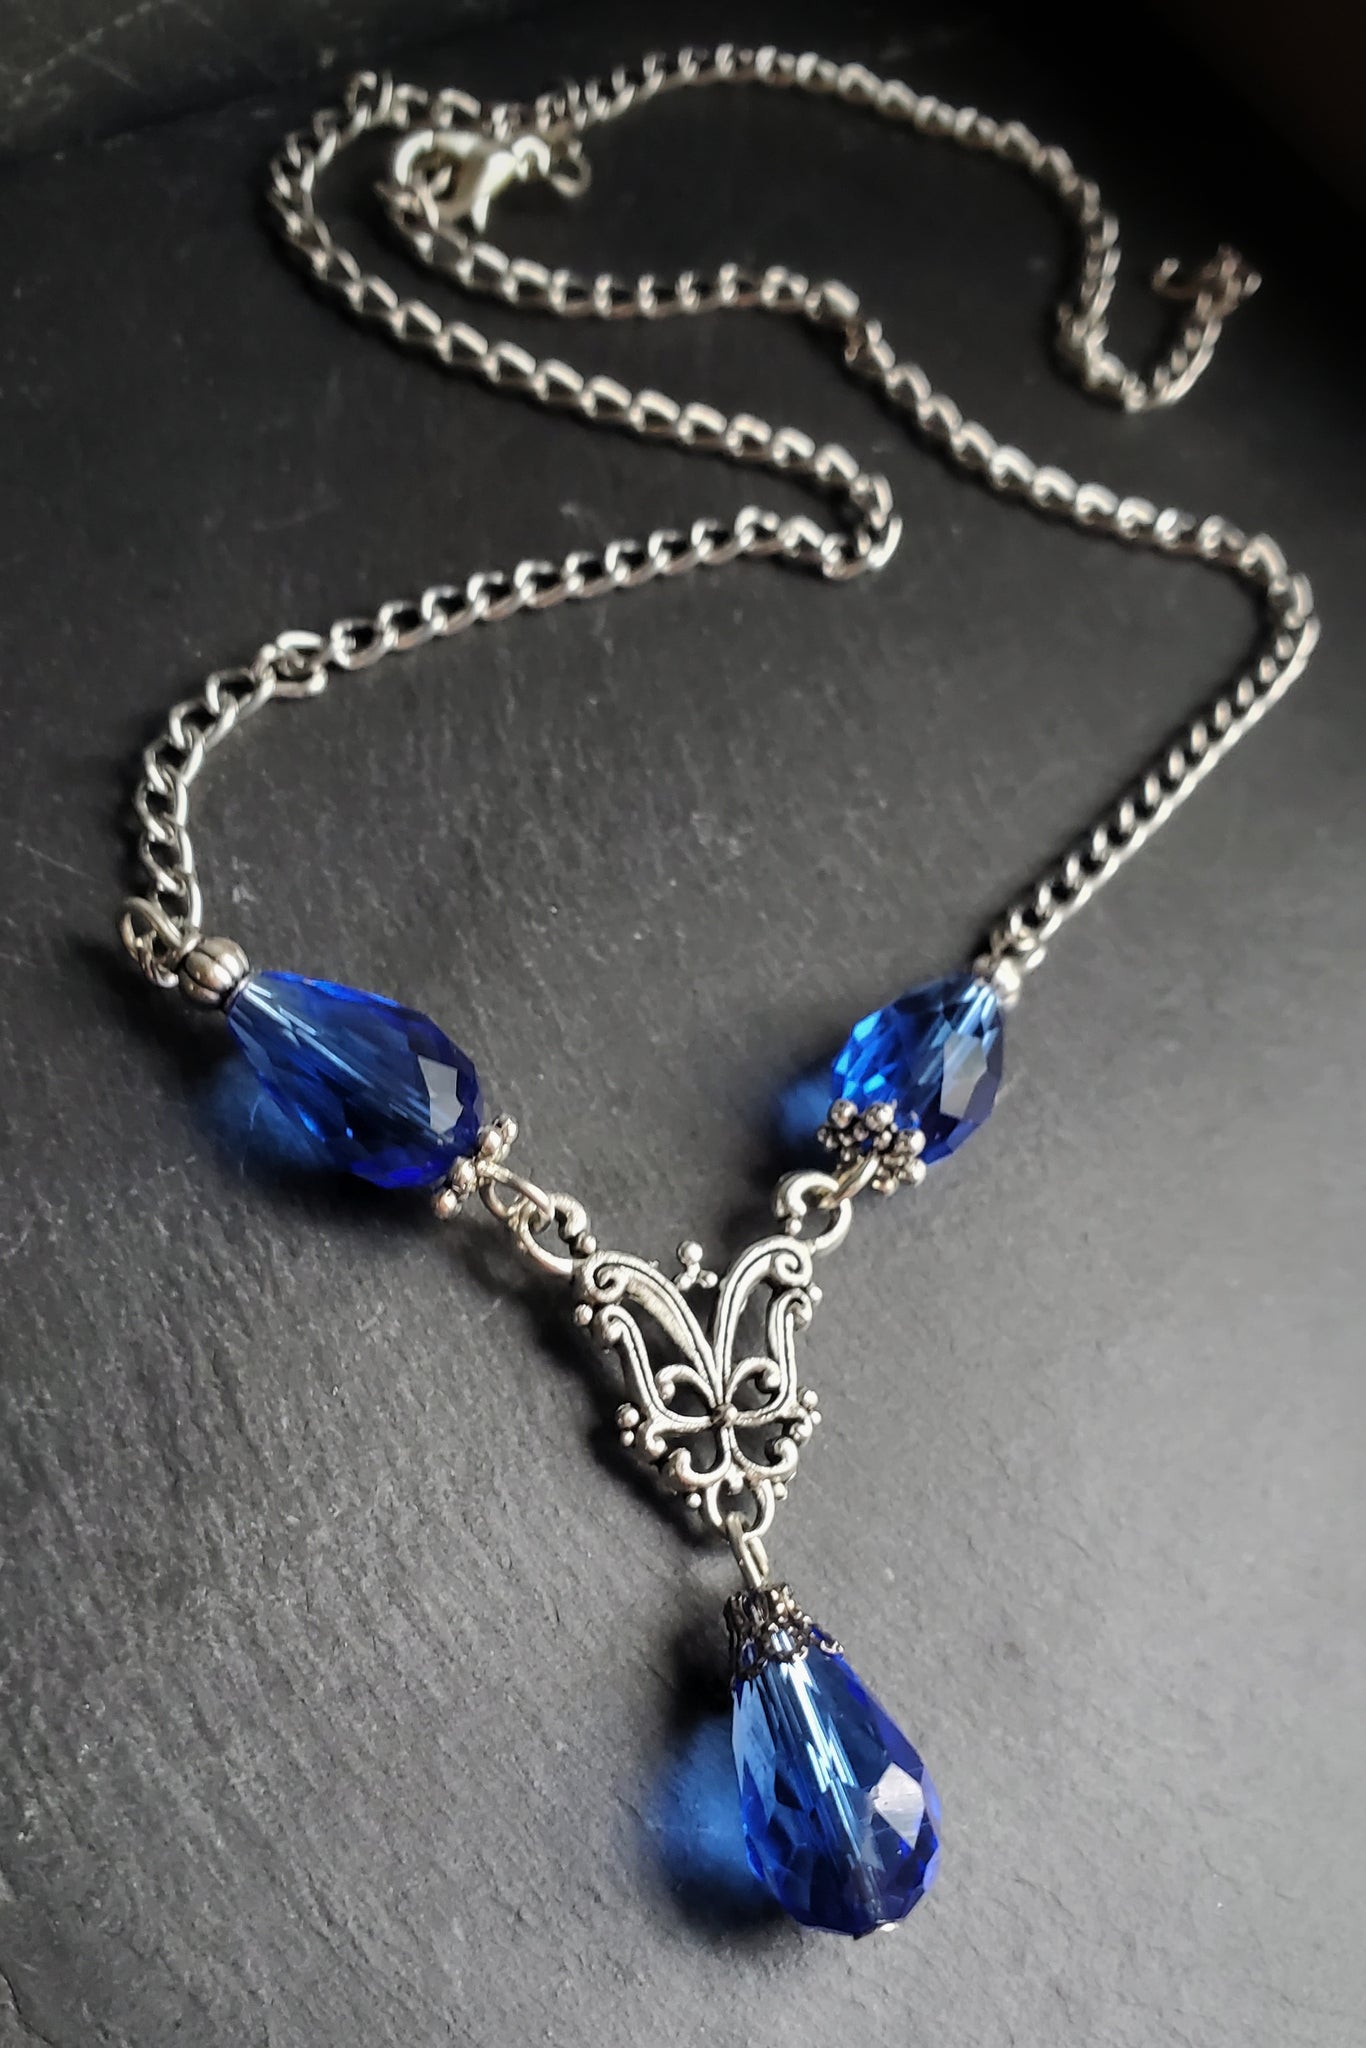 Blue Gothic Teardrop Necklace Handmade Jewelry Gift